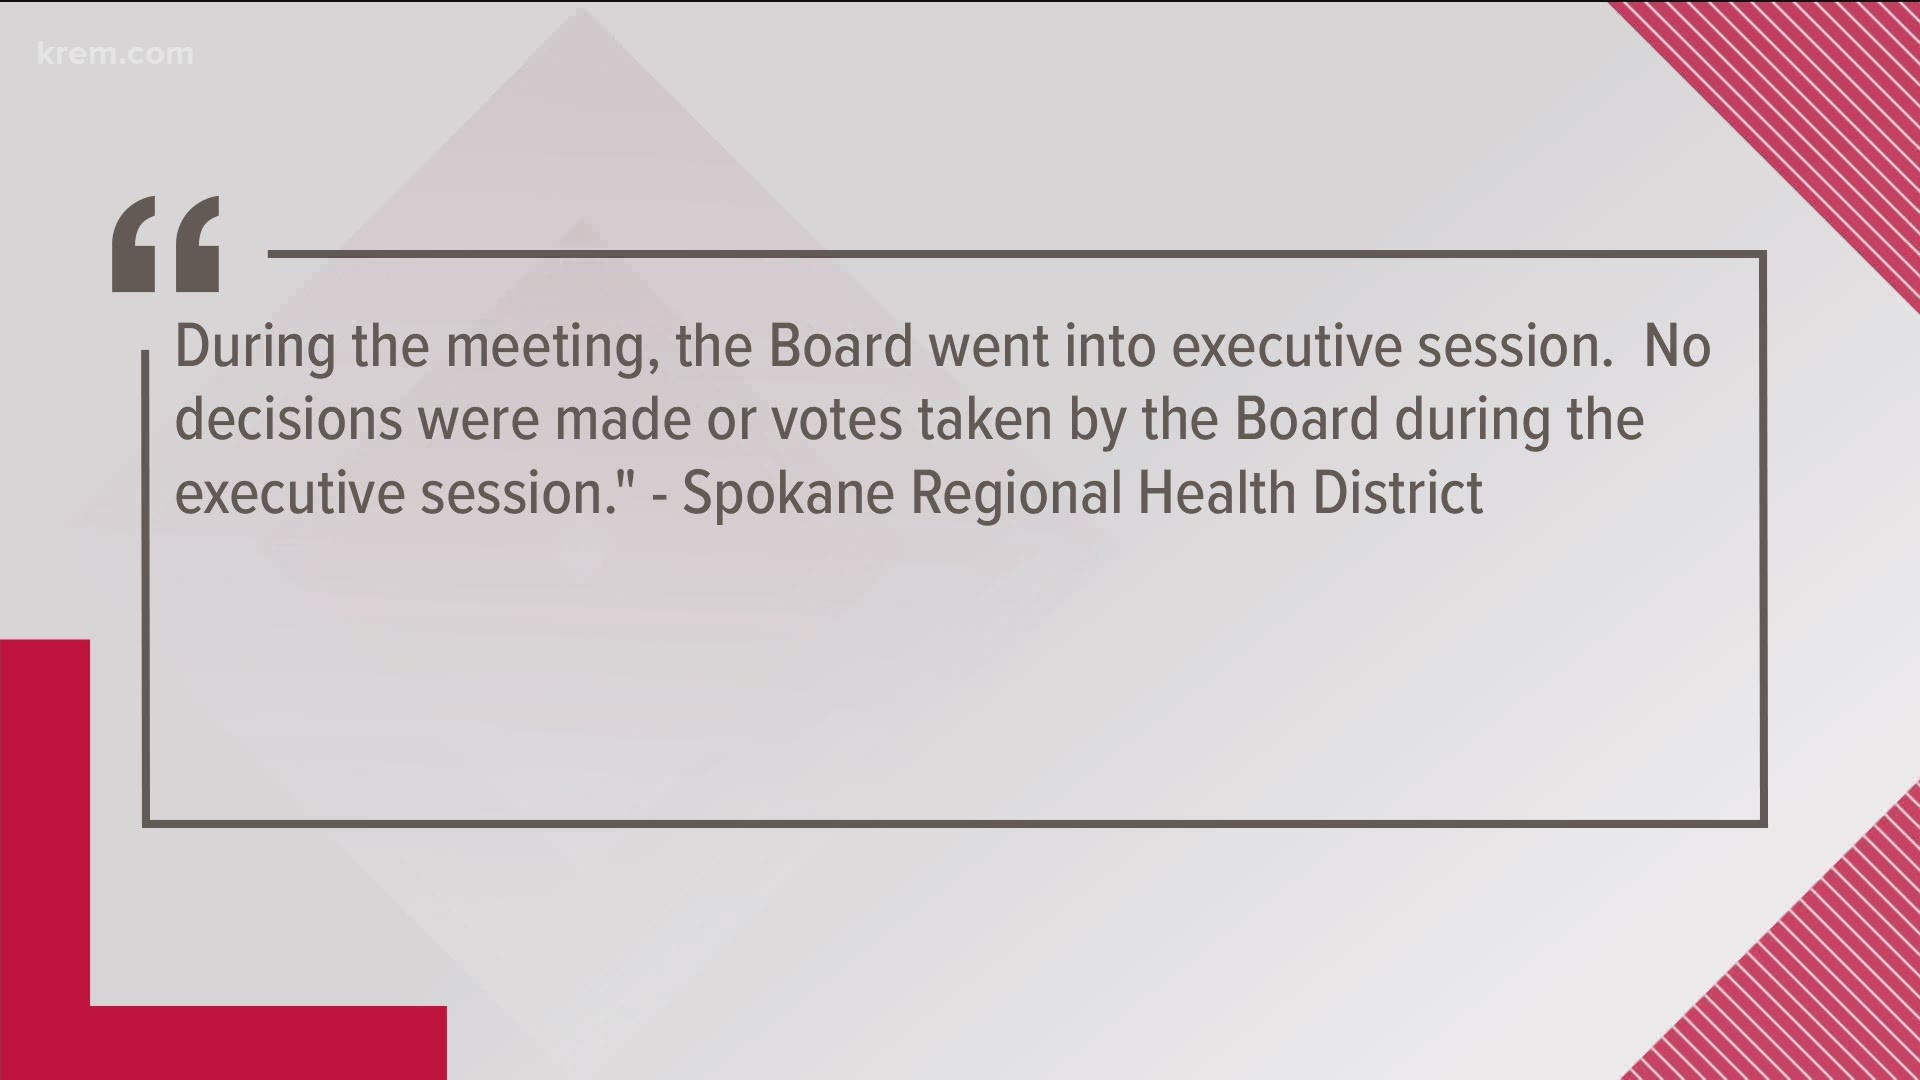 SRHD also said that the Health Board did not vote to approve Clark's request on Thursday, and a meeting where that vote will take place will be open to the public.